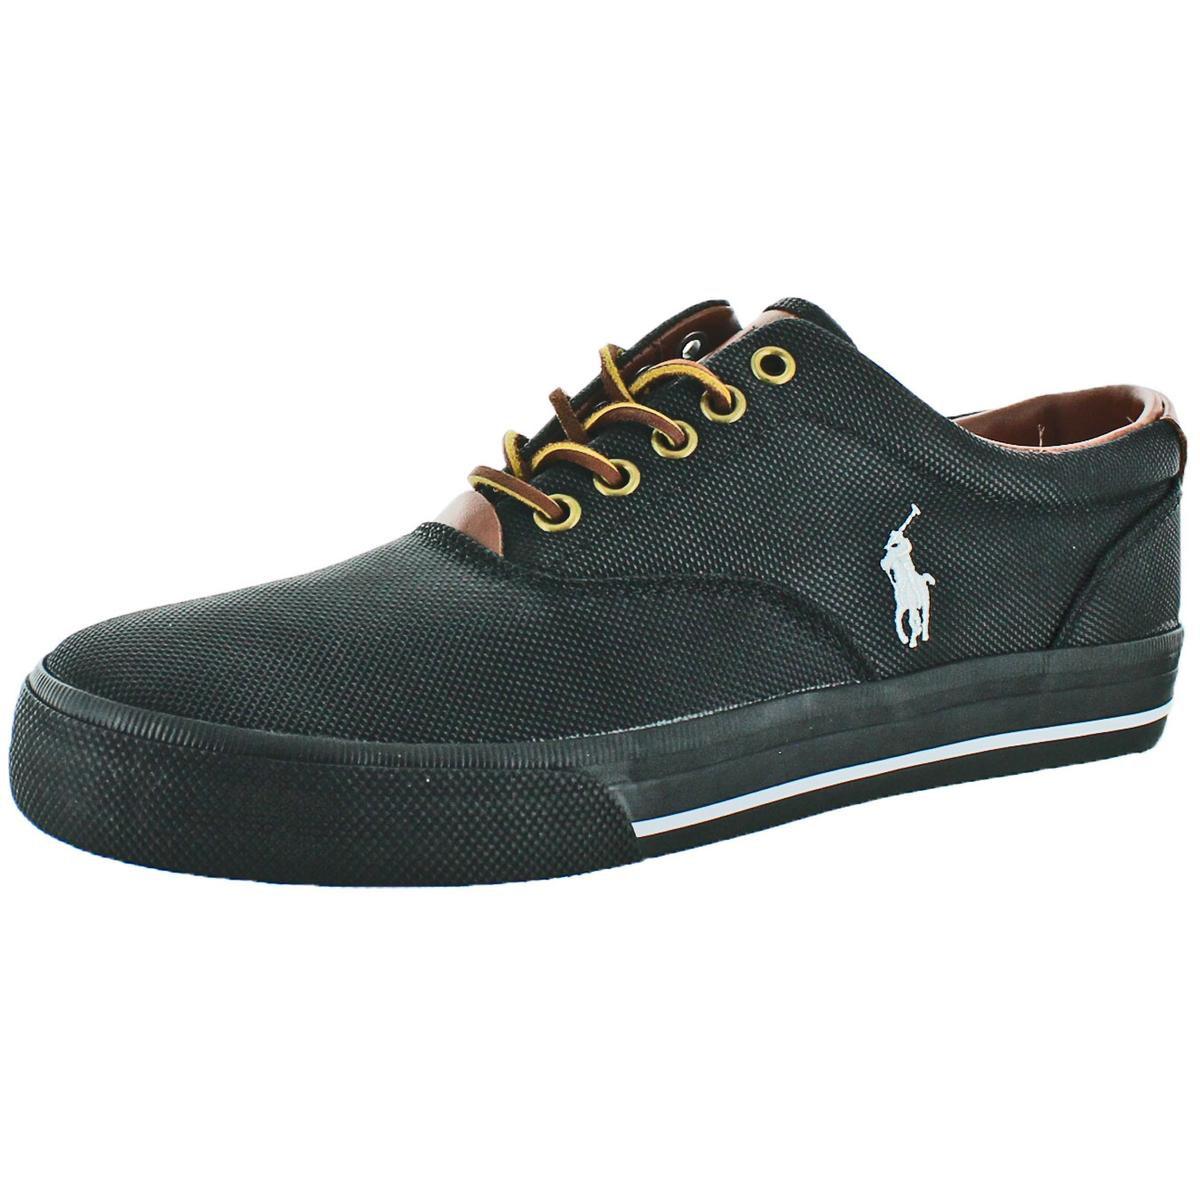 Lyst - Polo Ralph Lauren Vaughn Canvas Fashion Sneakers Shoes in Black ...